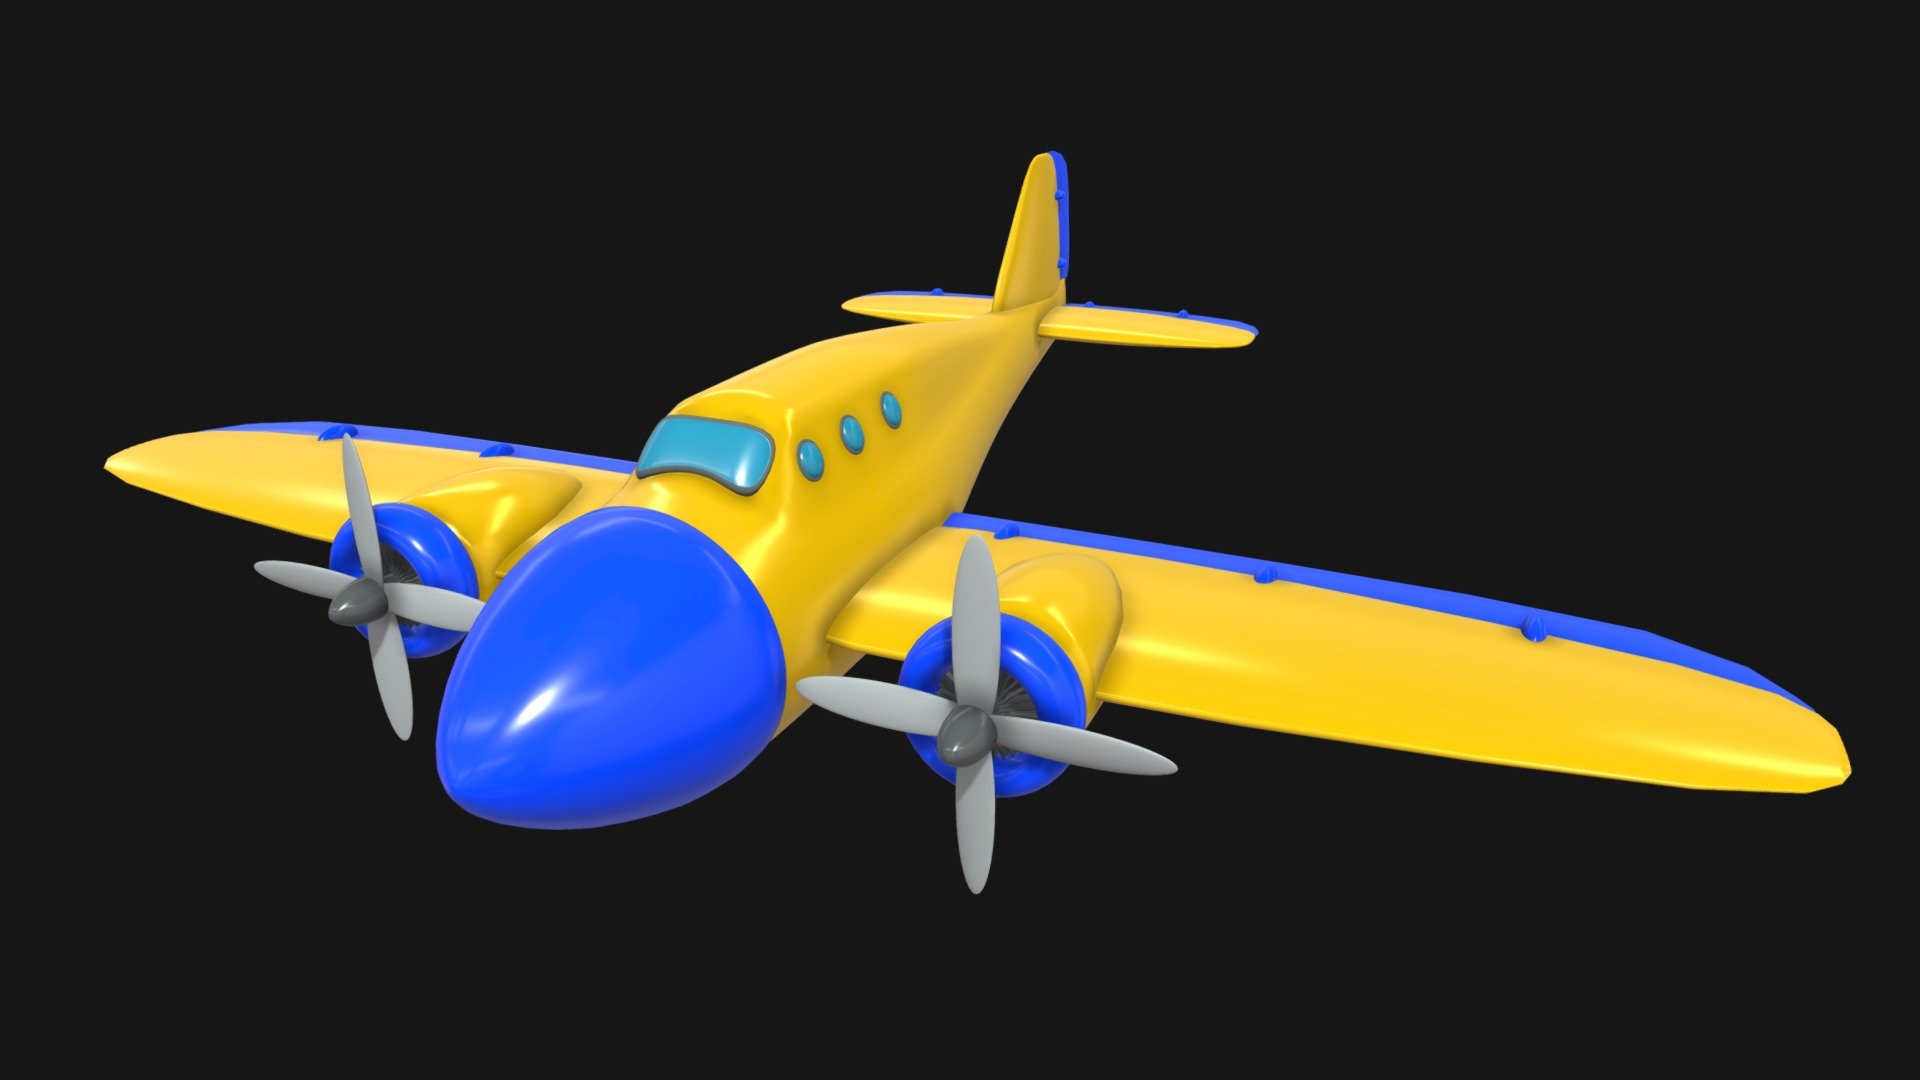 simple cartoon air plane





passager plane with 2 engines




could be a toy air plane




no textures.. just shaders for easy color changes



part of a collection https://skfb.ly/oI7VQ - Toon Plane 1 - Buy Royalty Free 3D model by Randall_3D 3d model